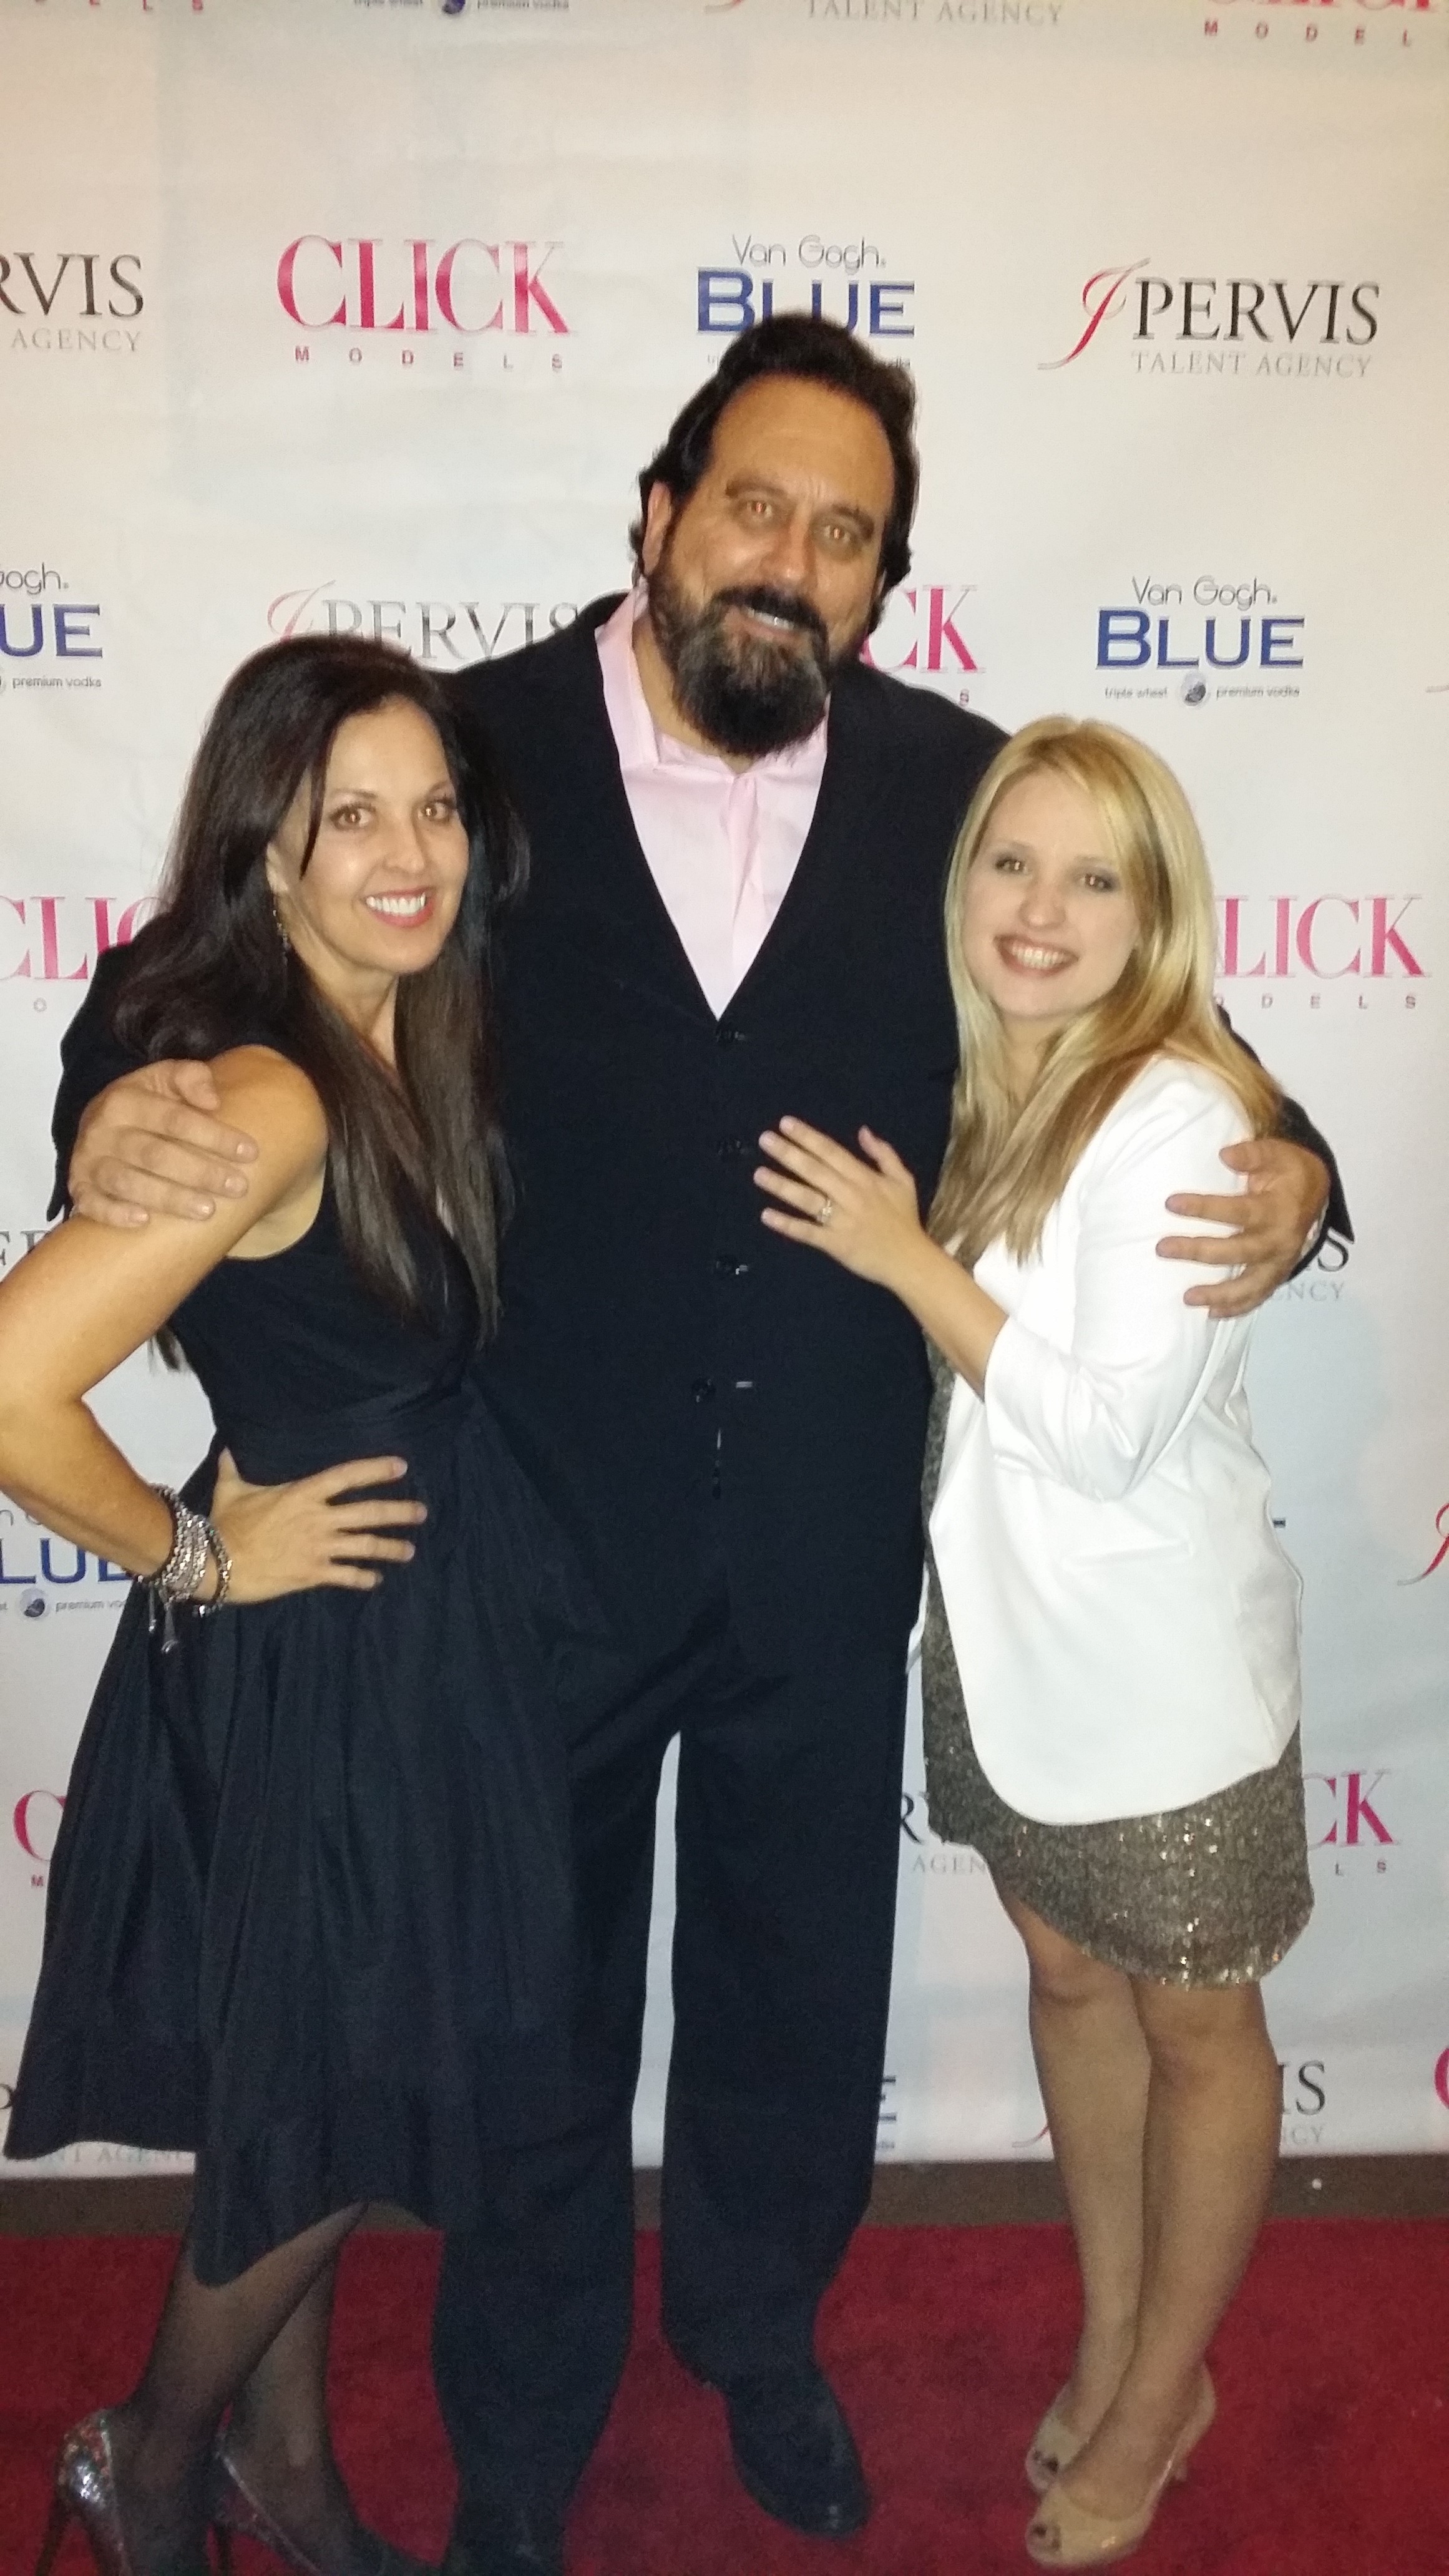 BIG JOHN KAP ON THE RED CARPET WITH HIS SUPER AGENTS JOY AND JAYME PERVIS.